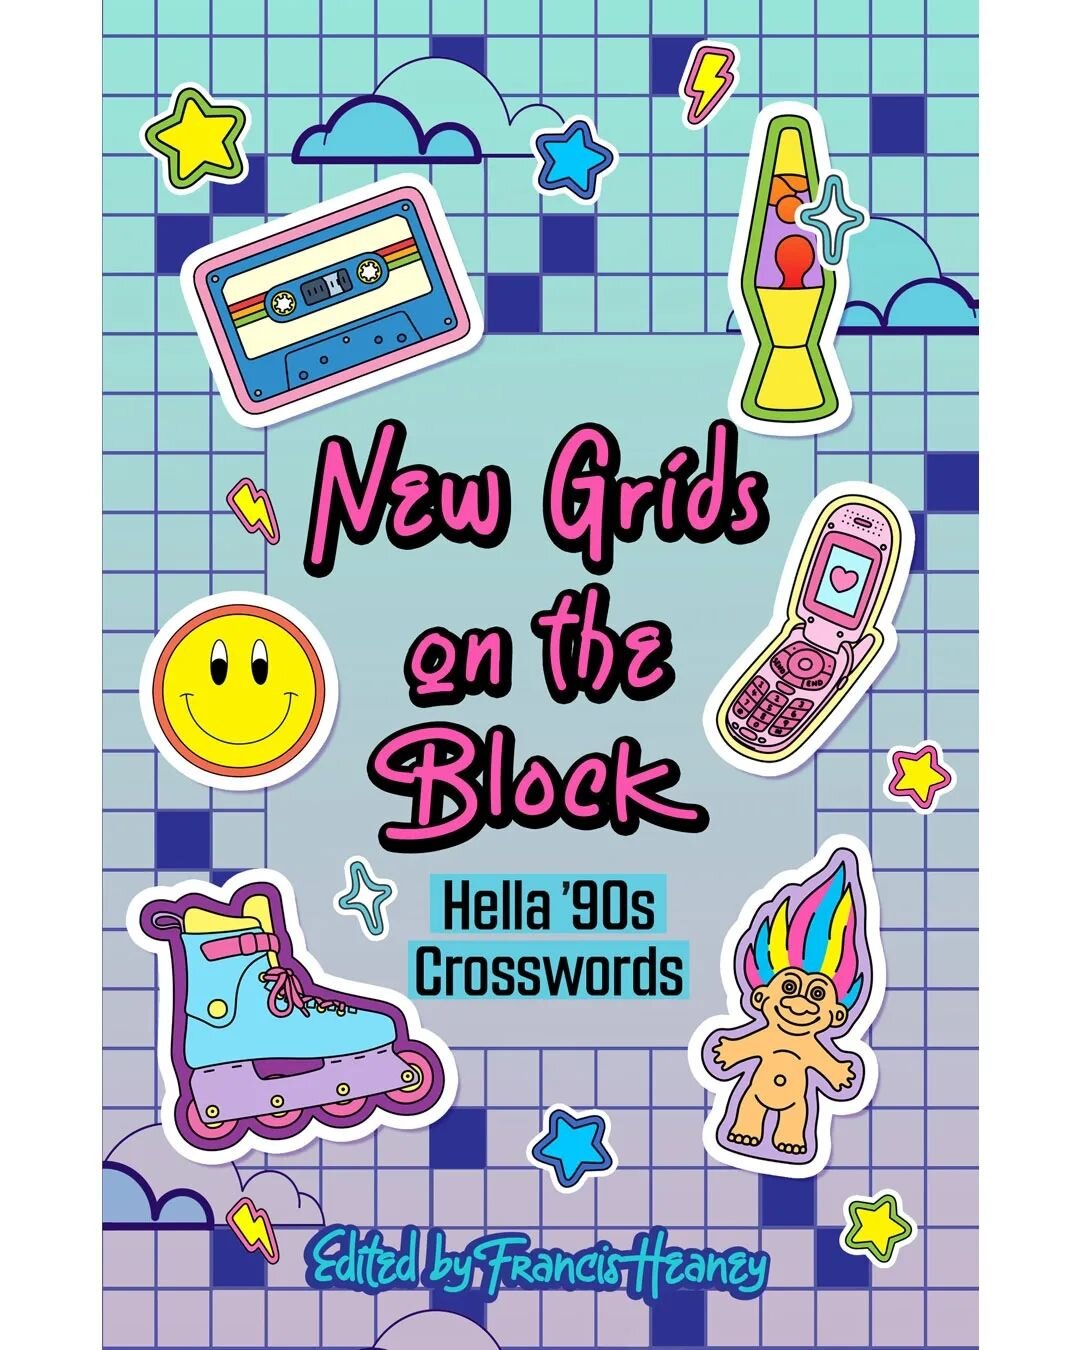 Fun icon illustrations I created for the book cover 'New Grids on the Block: Hella '90s Crosswords' edited by @heaneyf and published by @unionsqandco .
.
.
.
#book #bookcover #icons #stickers #fun #90s #retro #cassette #lamp #smiley #phone #rollerbla